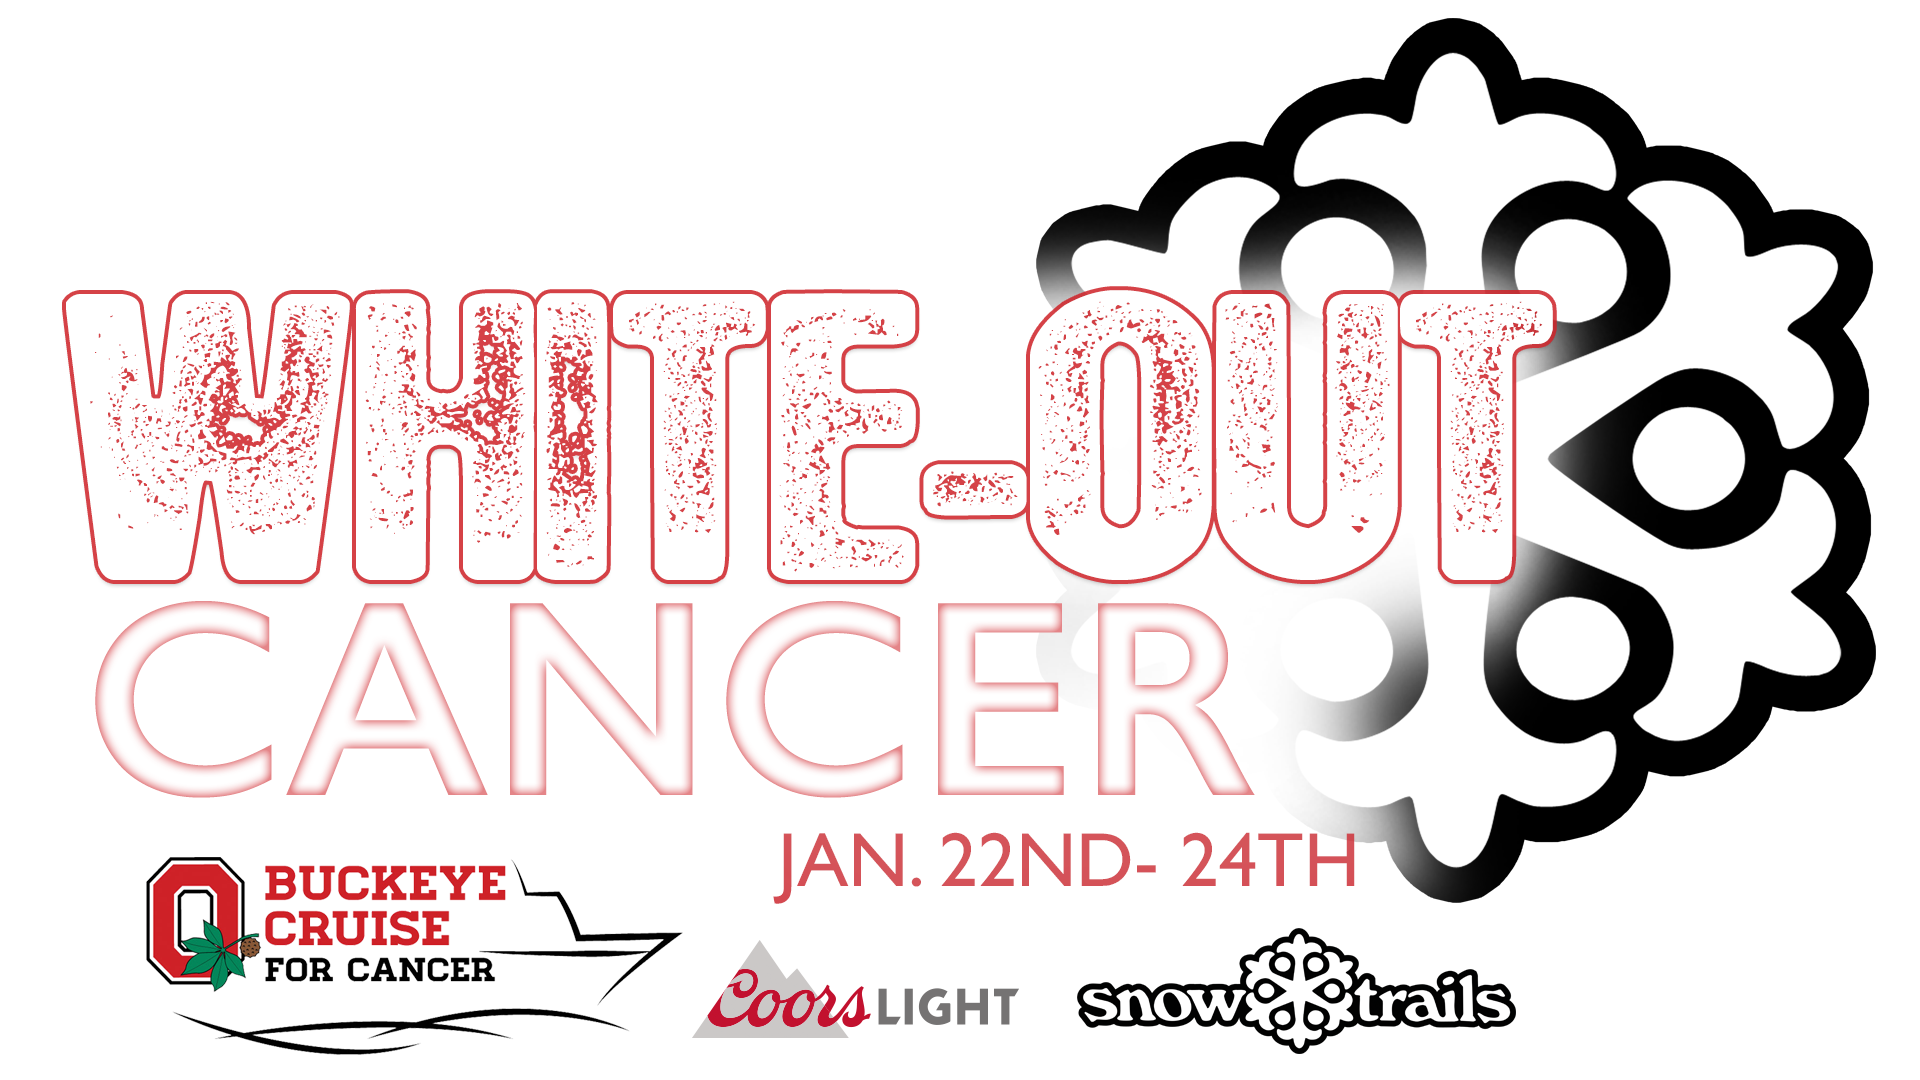 White-Out Cancer at Snow Trails brought to you by Buckeye Cruise for Cancer, Coors Light, and Snow Trails